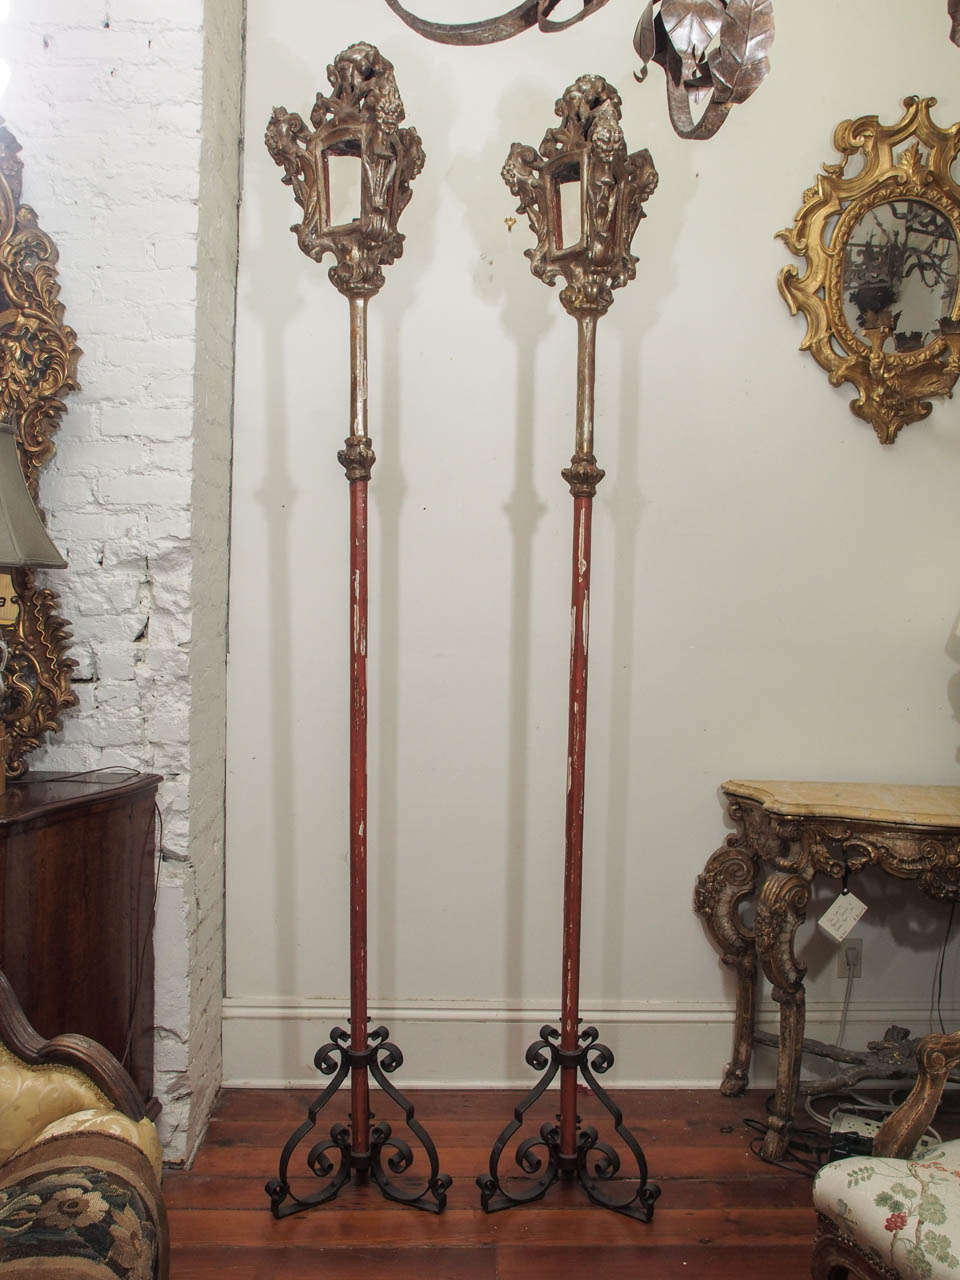 Pair of 19th c. Processional Pole Lanterns in Iron Stands. This pair is silver gilt. They are three sided with removable iron stands.